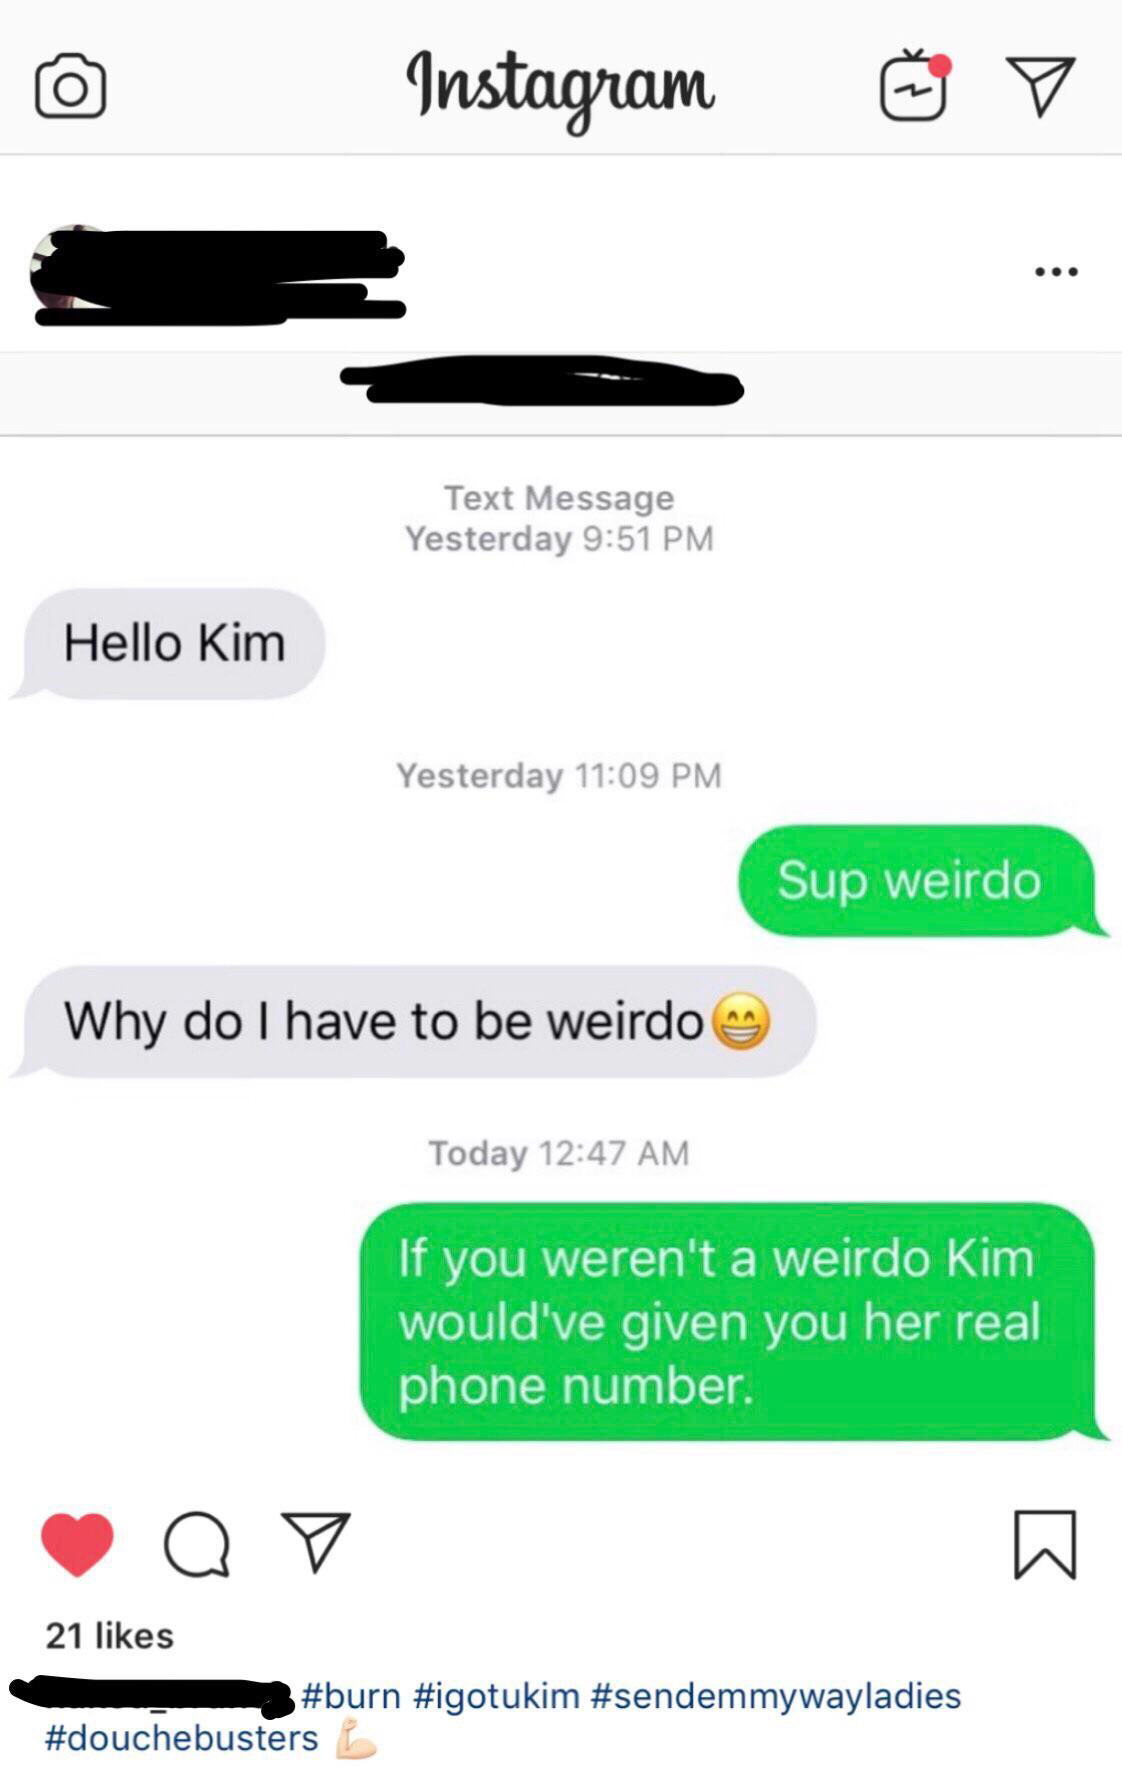 instagram - Instagram O Text Message Yesterday Hello Kim Yesterday Sup weirdo Why do I have to be weirdo Today If you weren't a weirdo Kim would've given you her real phone number, Qy 21